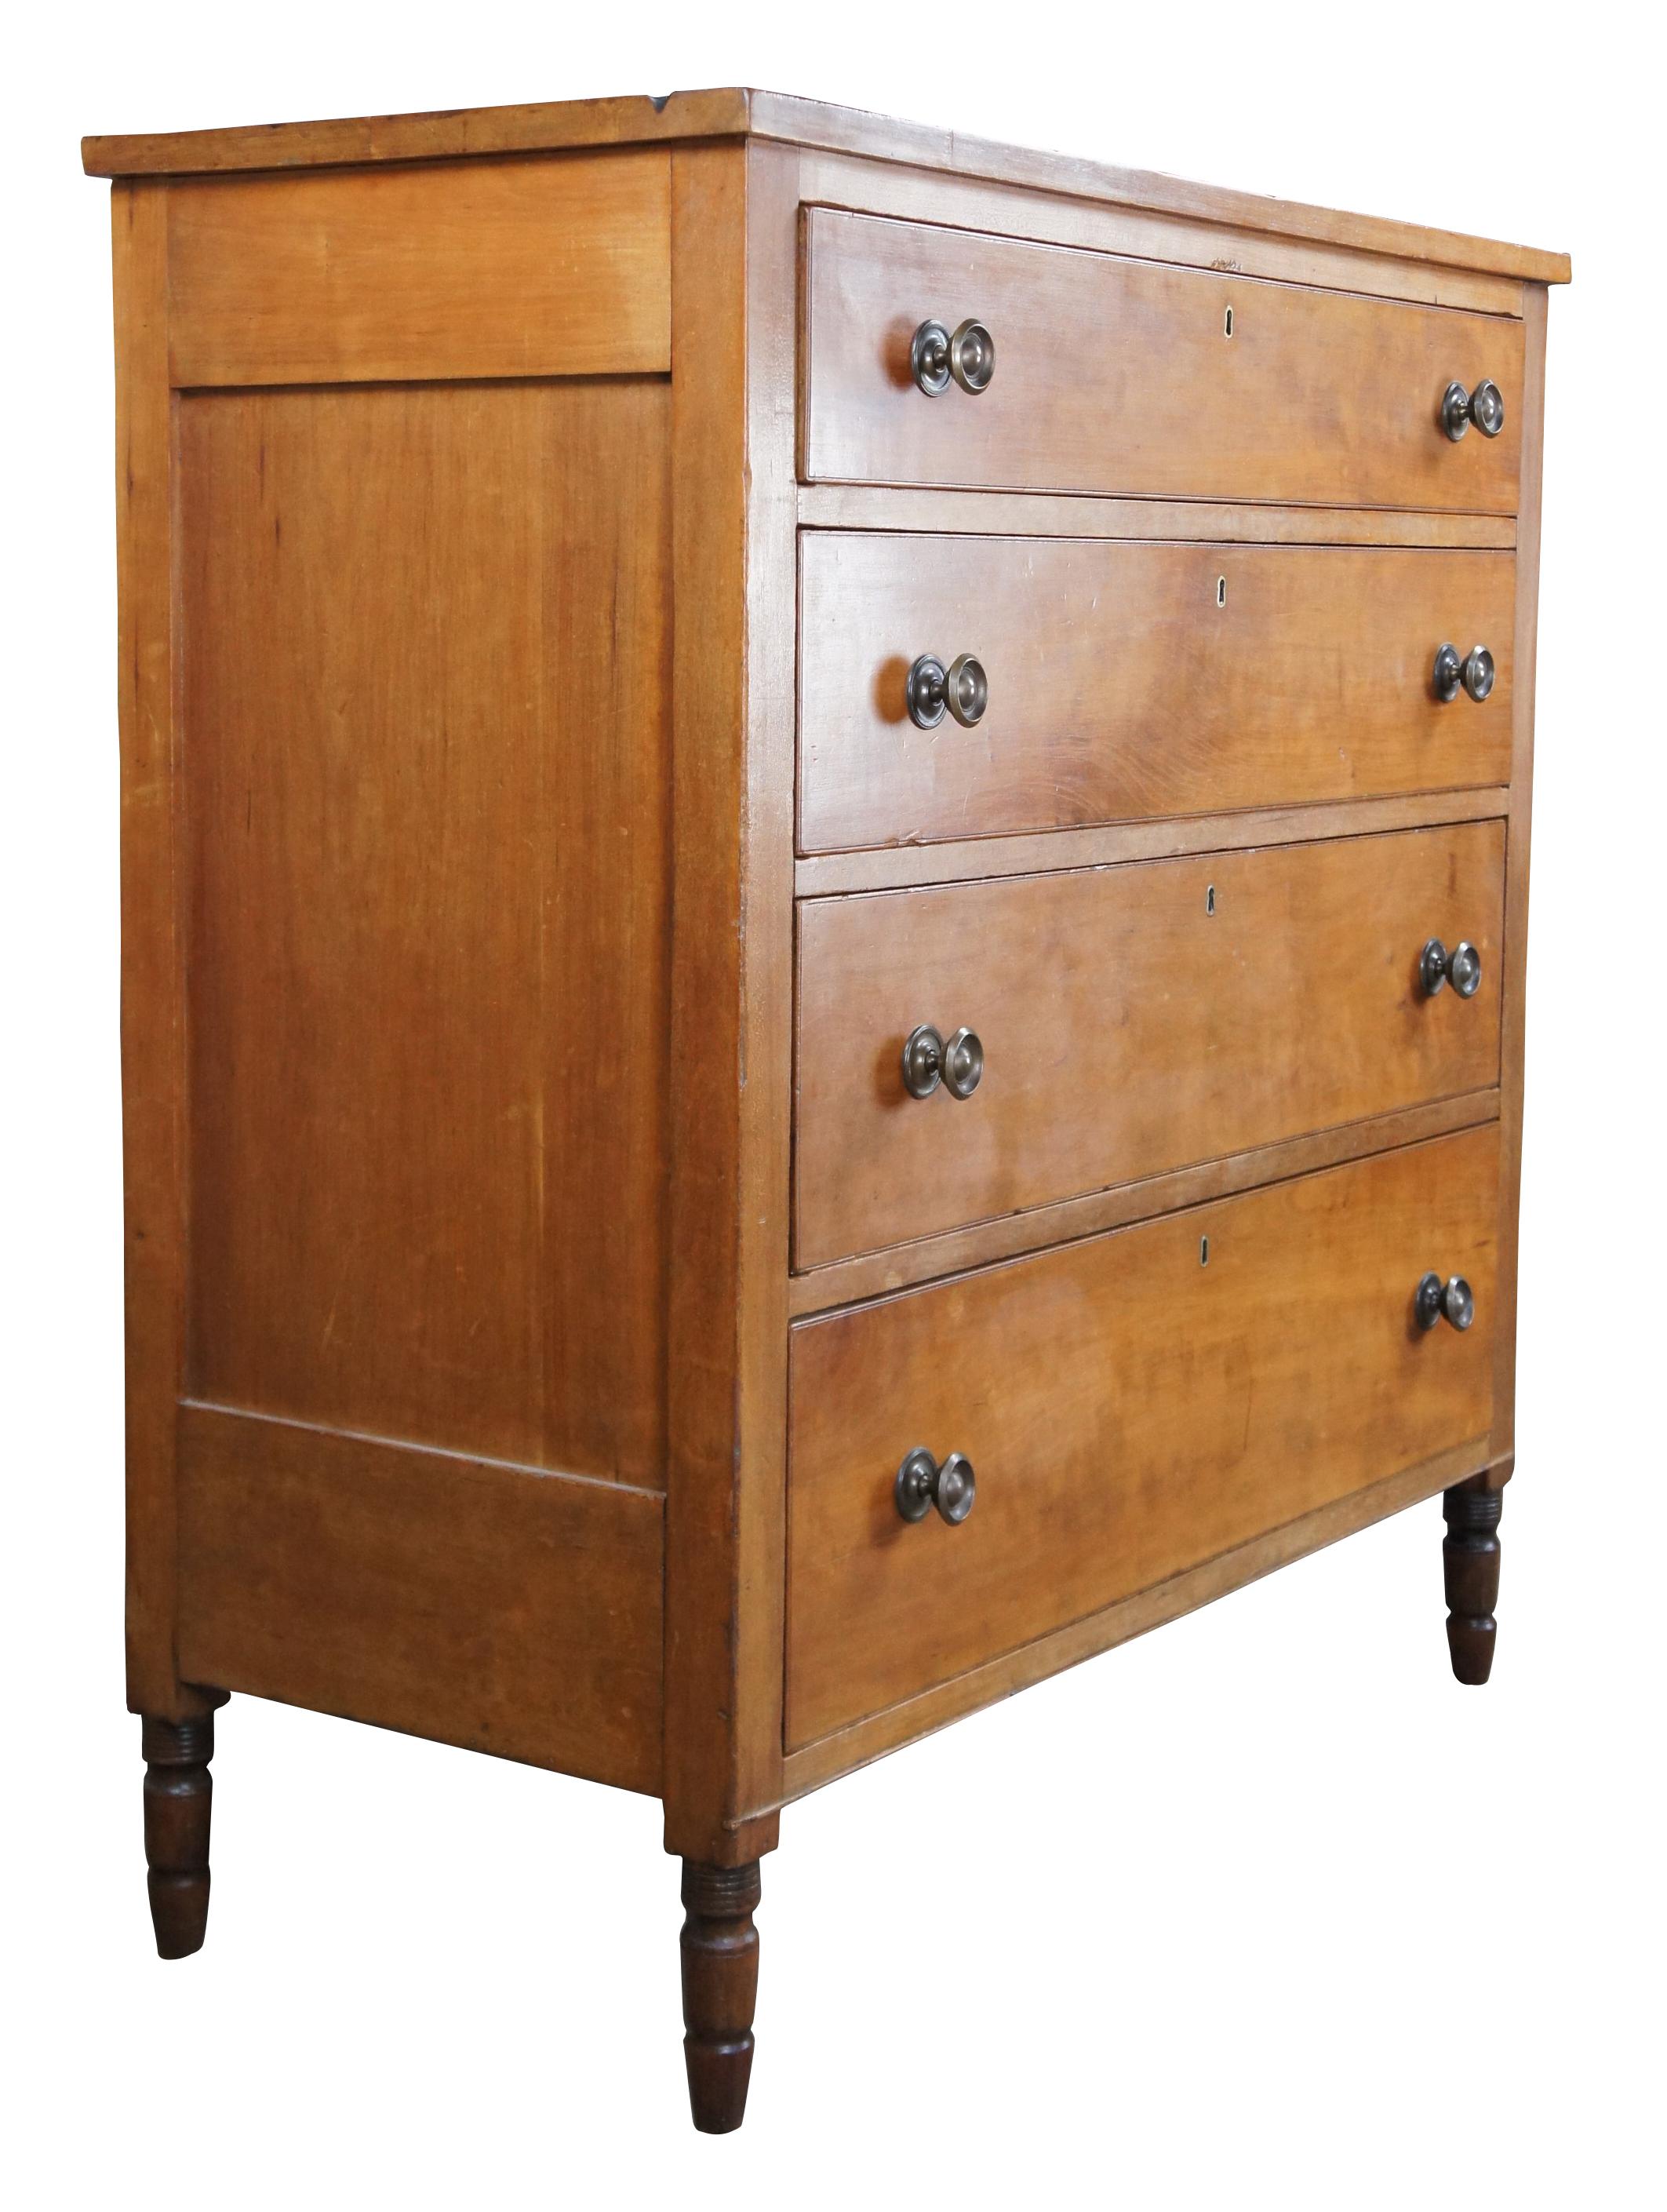 American Colonial Antique 19th C. Early American Solid Cherry Tallboy Chest of Drawers Dresser